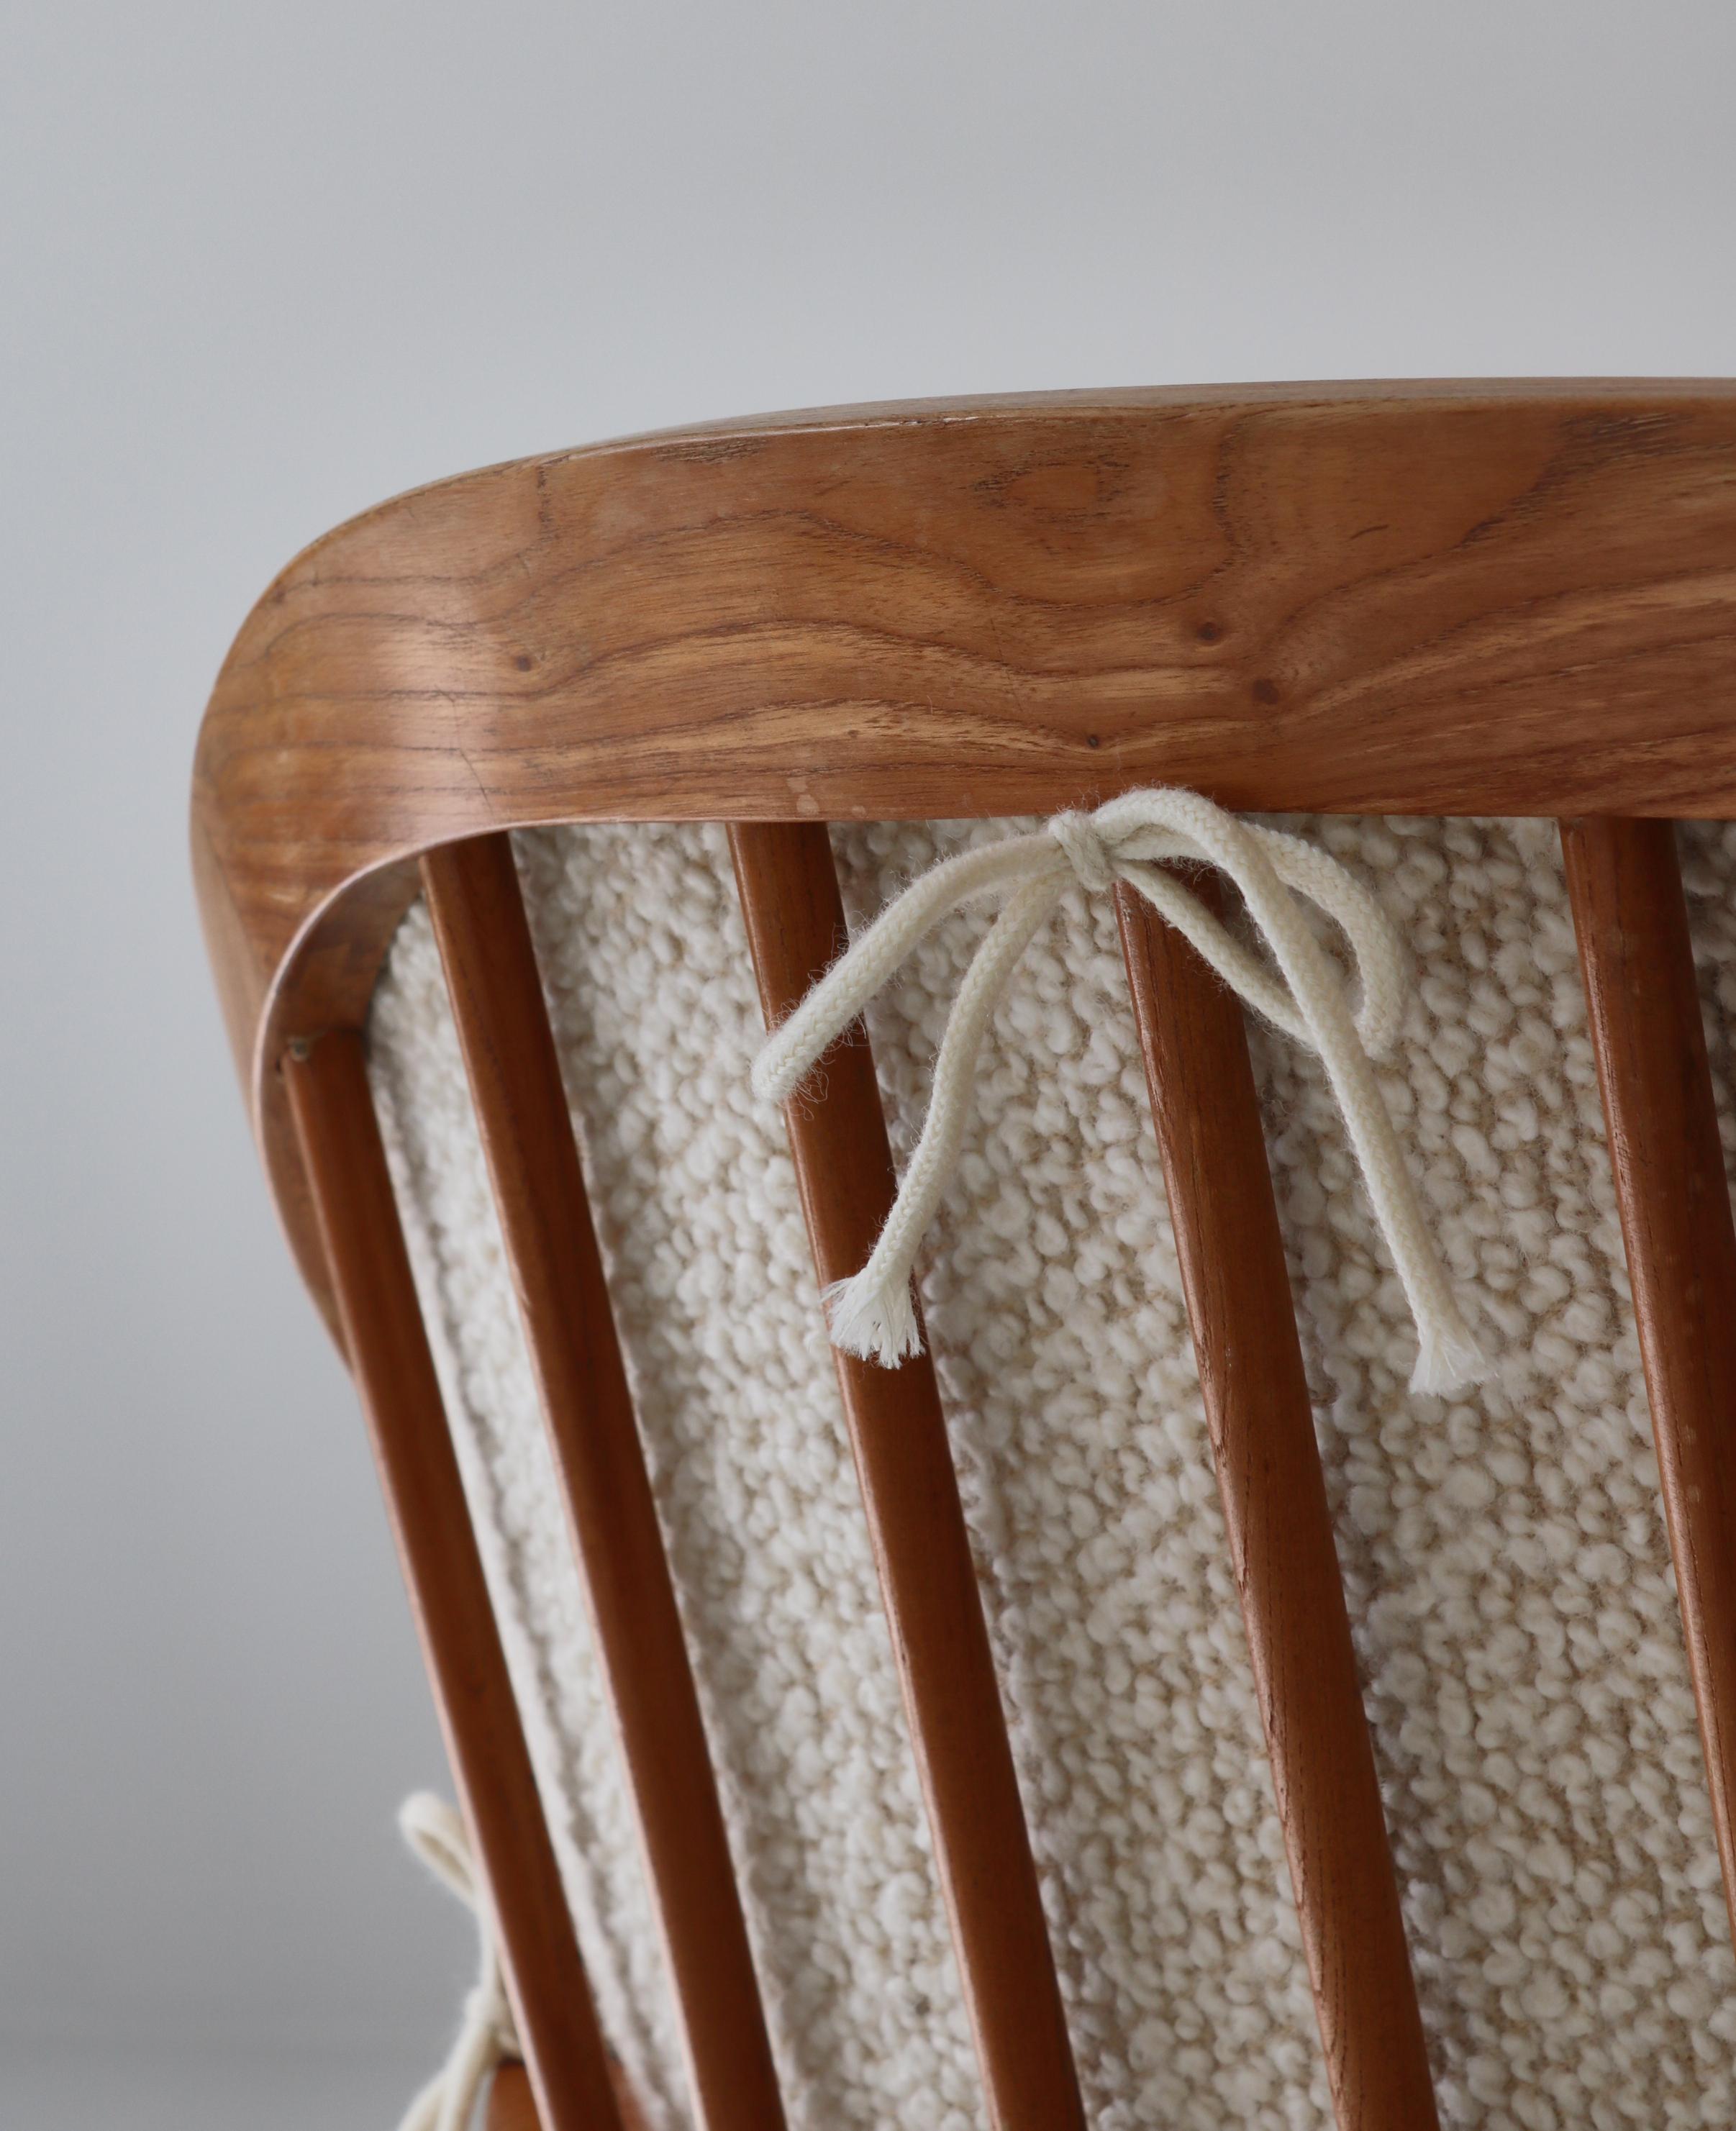 Scandinavian Modern Windsor Chair in Patinated Ash and White Bouclé, 1940s For Sale 1